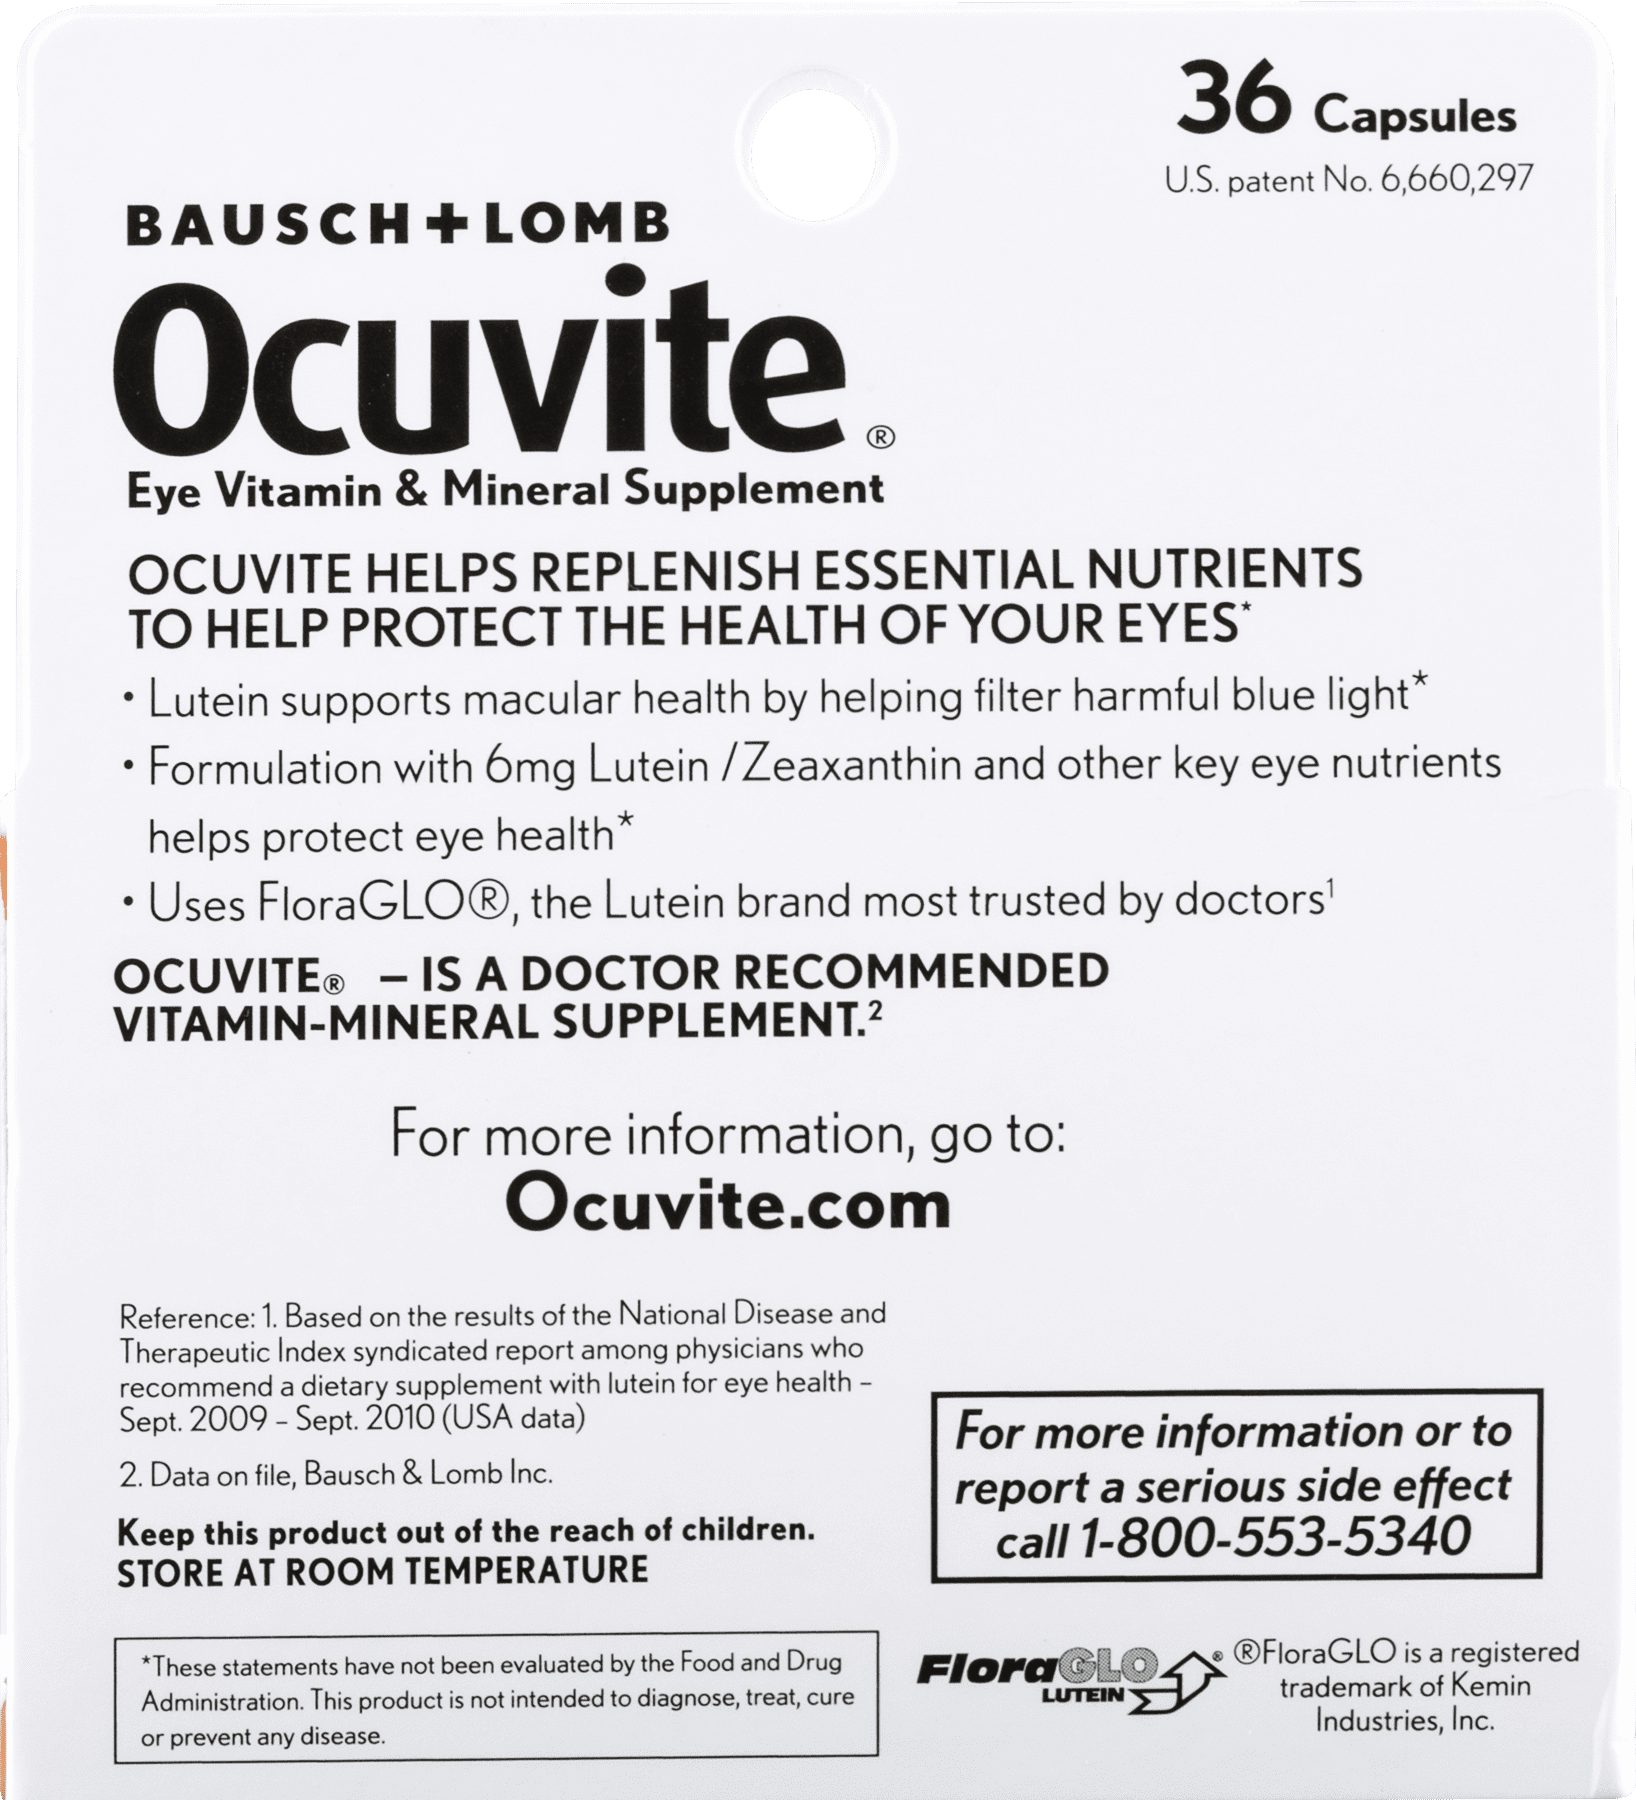 What are some common adverse reactions to Ocuvite?